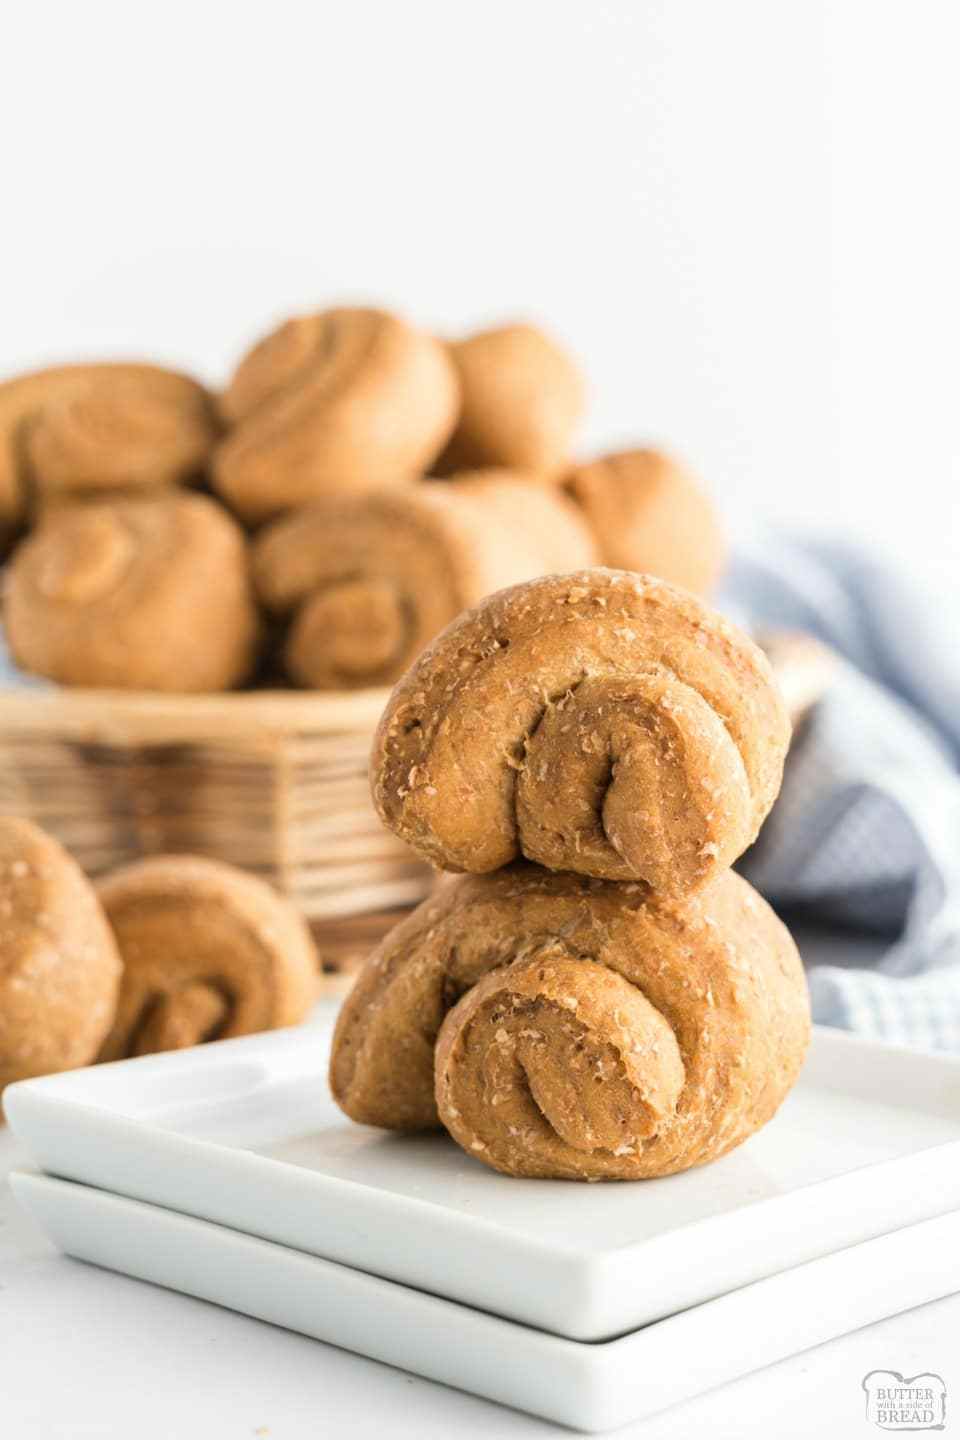 Soft Wheat Dinner Rolls made with whole wheat flour, yeast, oats and molasses for a homemade roll with fantastic taste and texture! Family favorite wheat dinner roll recipe!